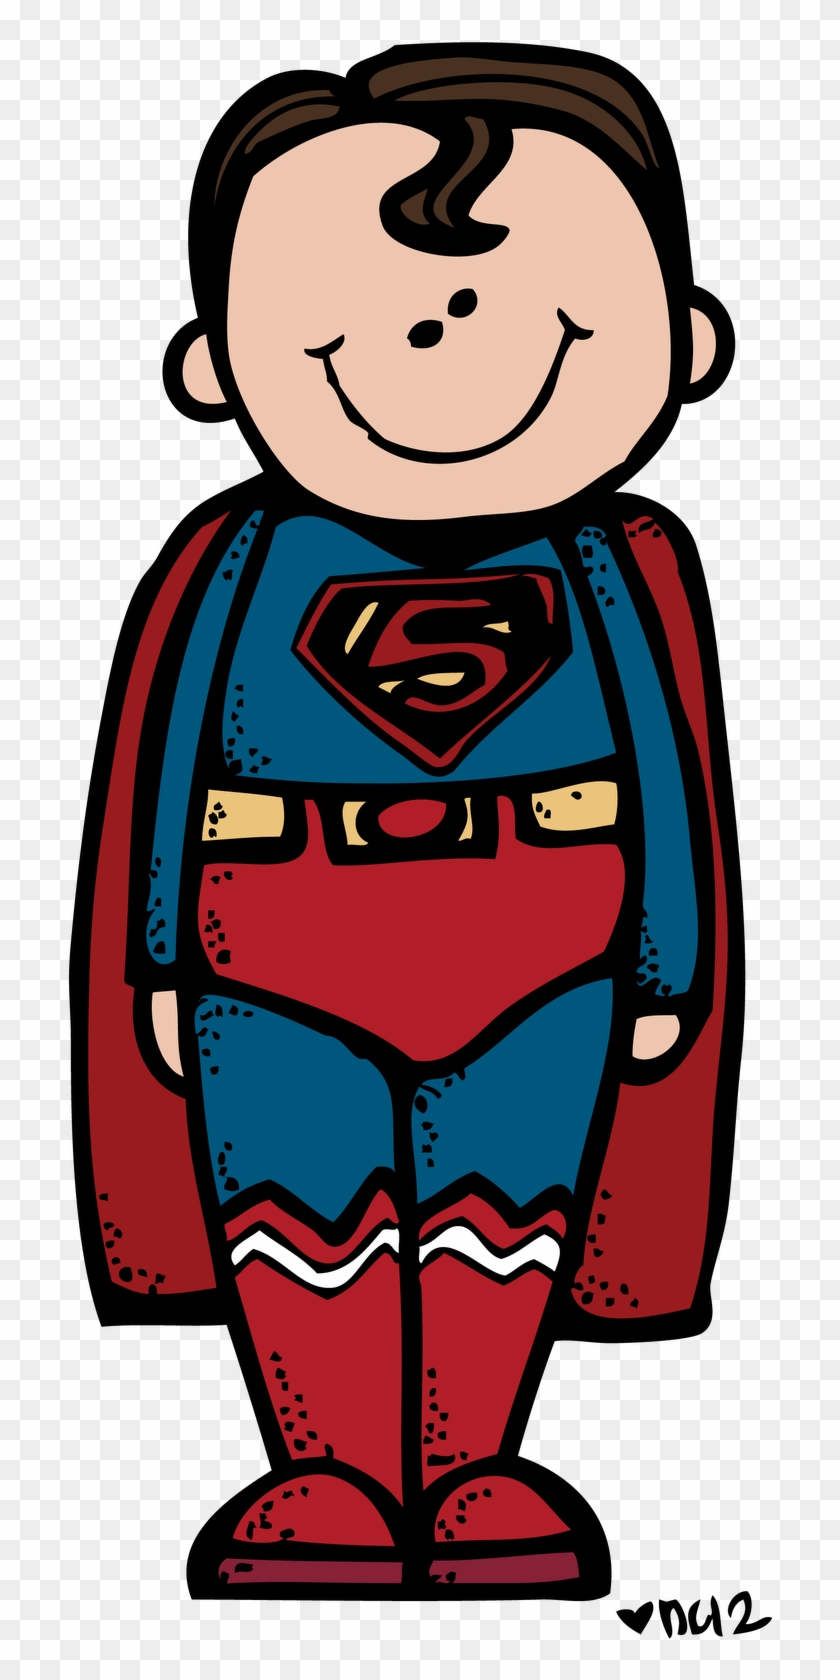 Superdad Freebie Book On Tptgreat For Father's Day - Say No To Drugs Superhero #450397